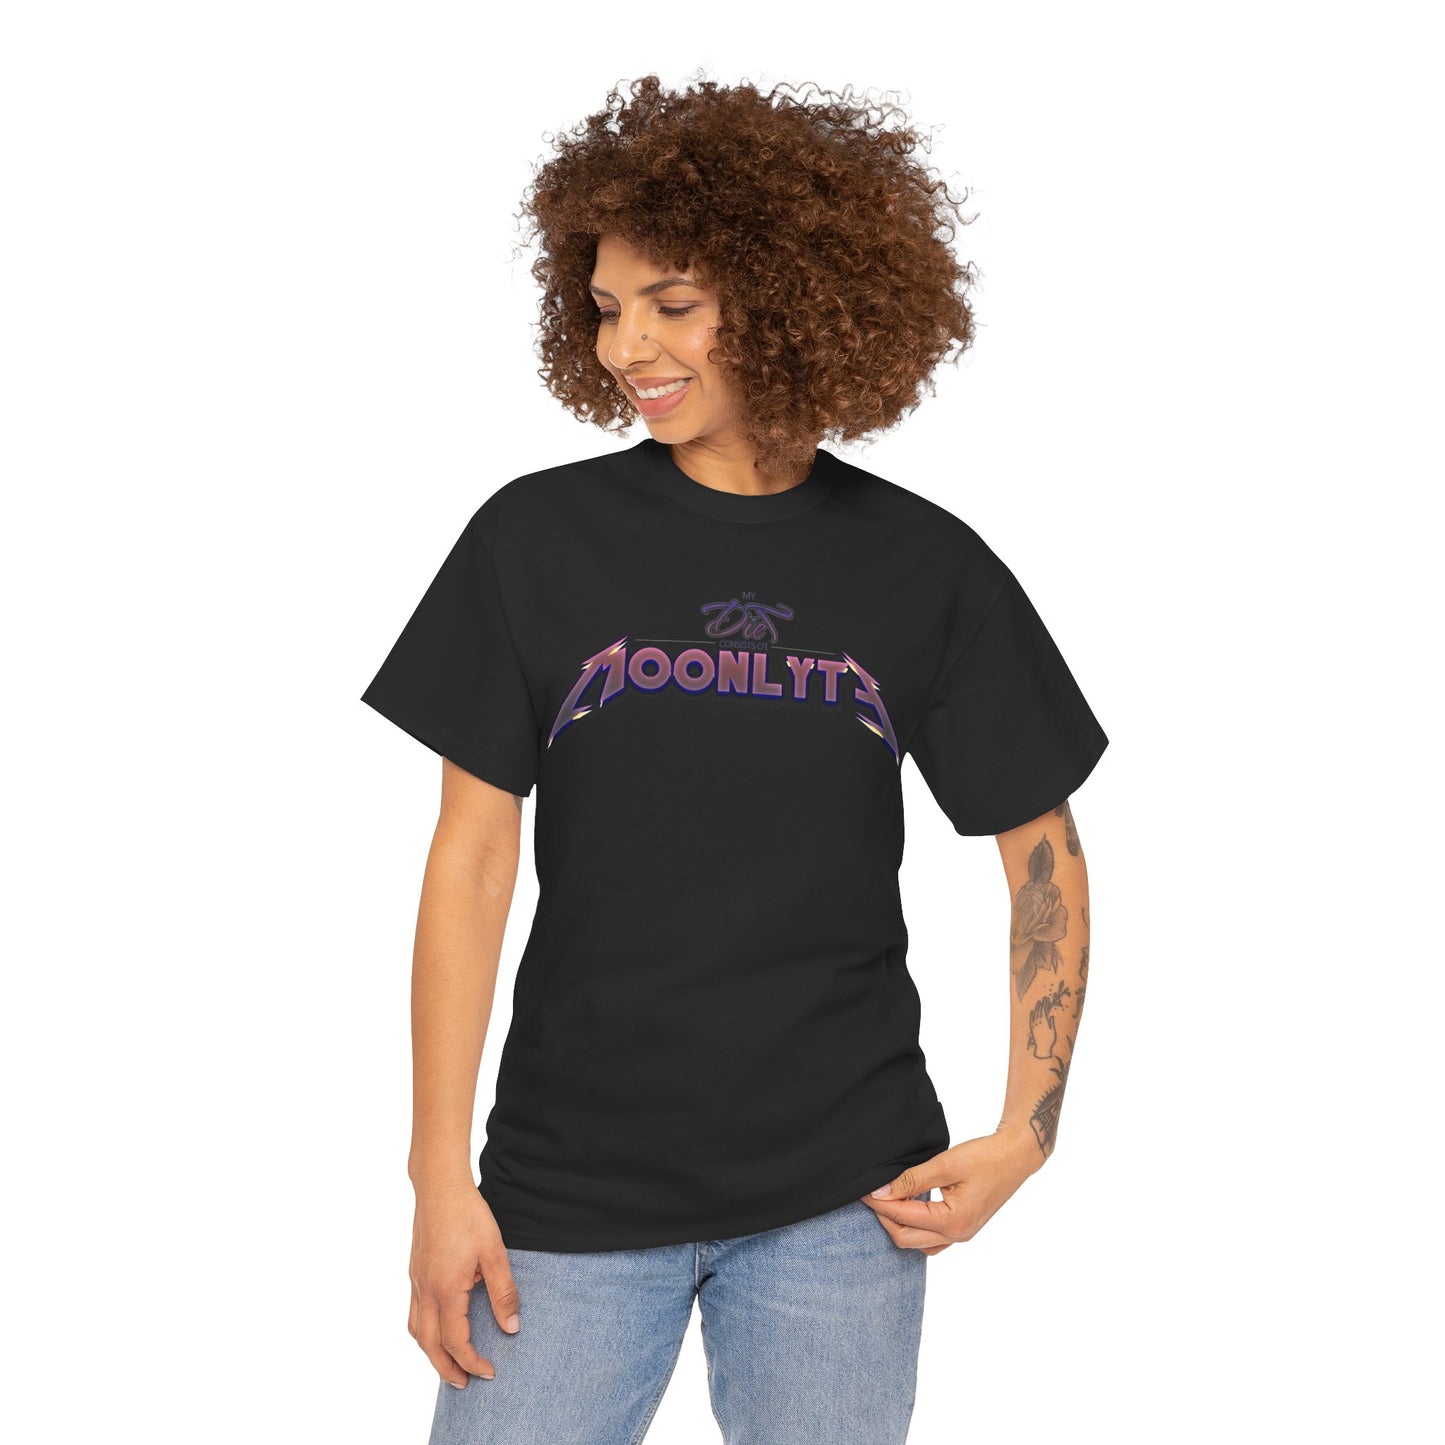 My Diet Consists of Moonlyte • Cotton Tee